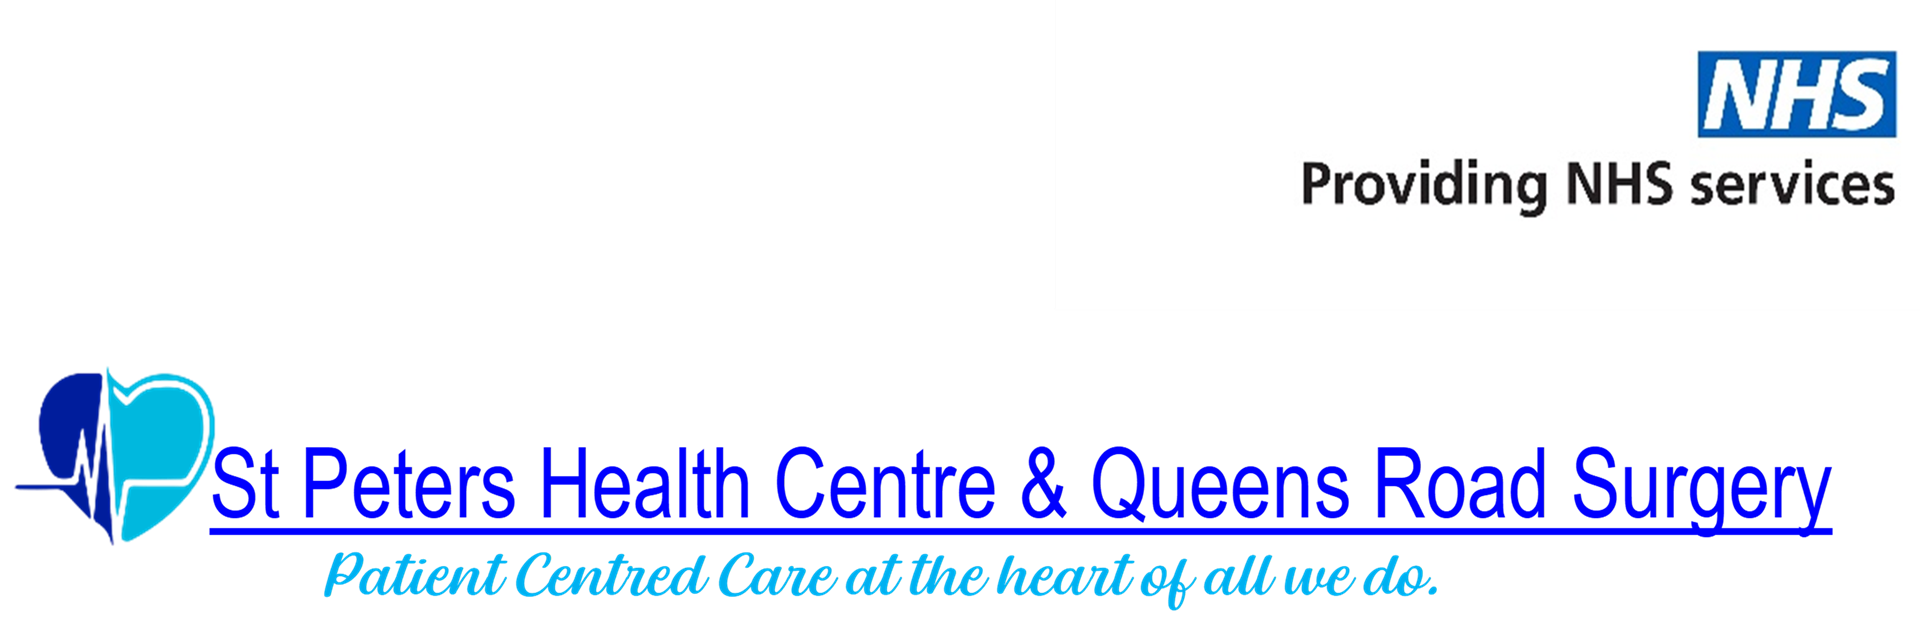 Queens Road Surgery and St Peters Health Centre Logo